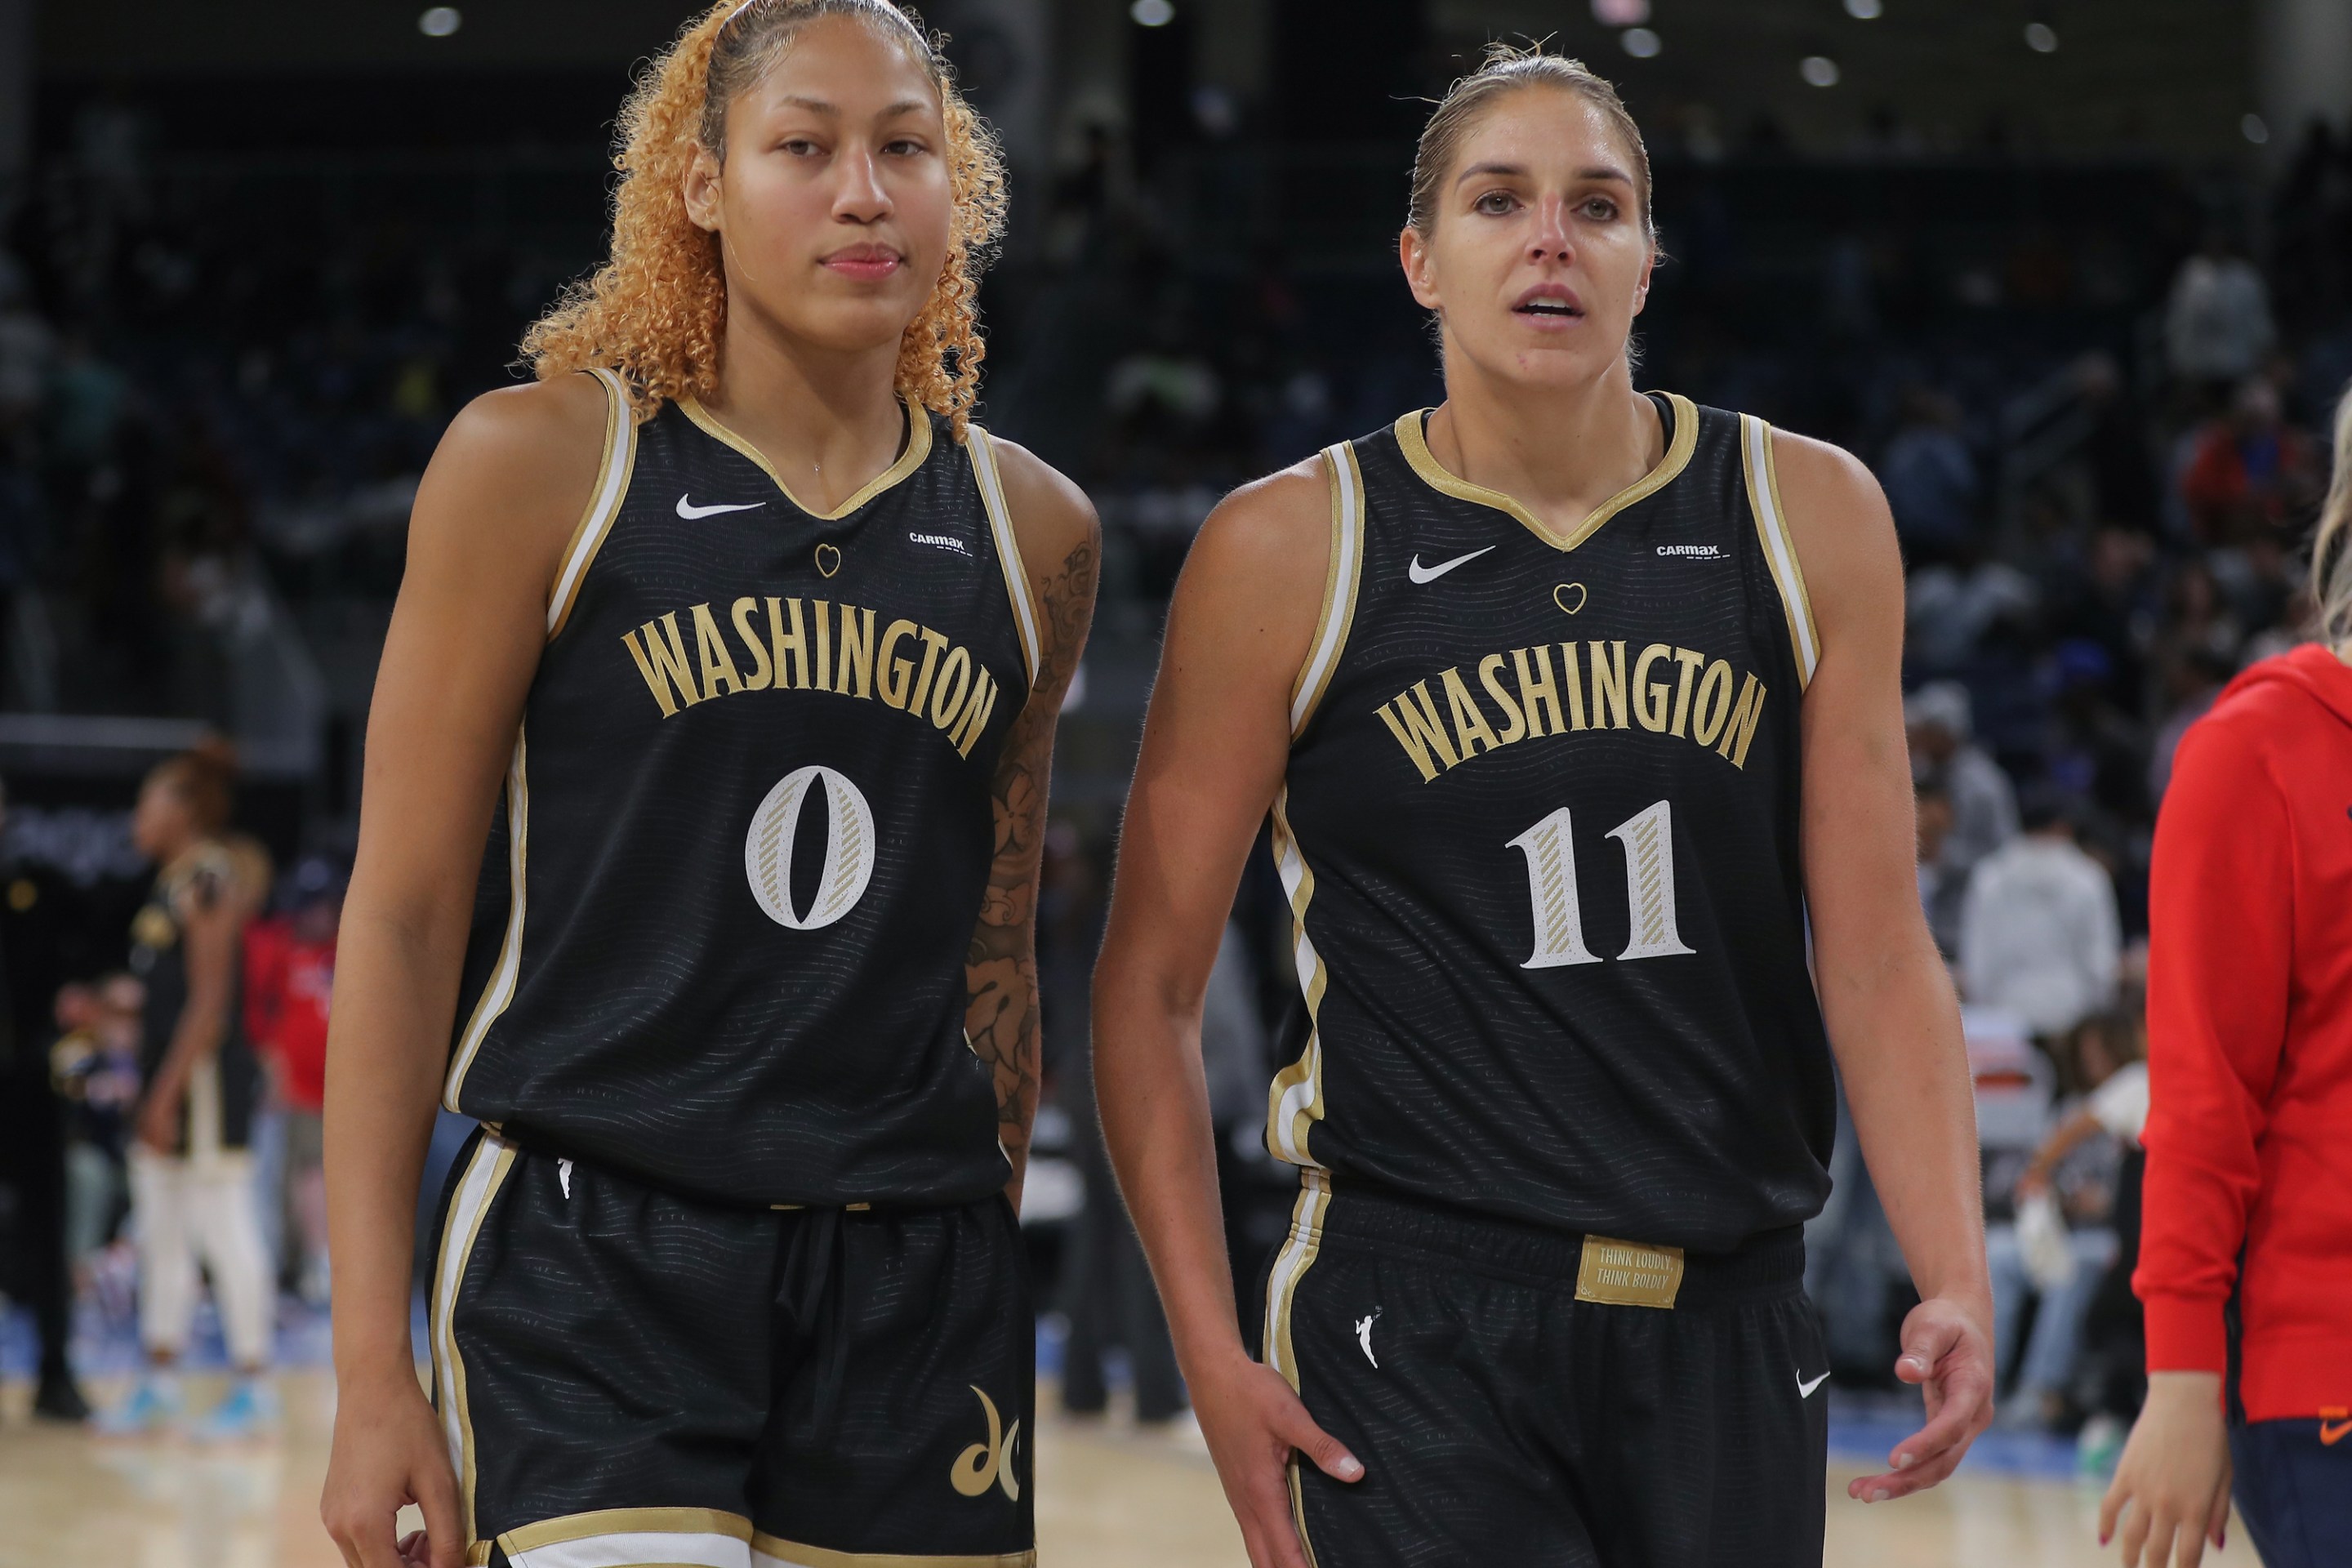 Washington Mystics center Shakira Austin (0) and Washington Mystics forward Elena Delle Donne (11) looks on after a WNBA game between the Washington Mystics and the Chicago Sky on May 26, 2023, at Wintrust Arena in Chicago, IL.